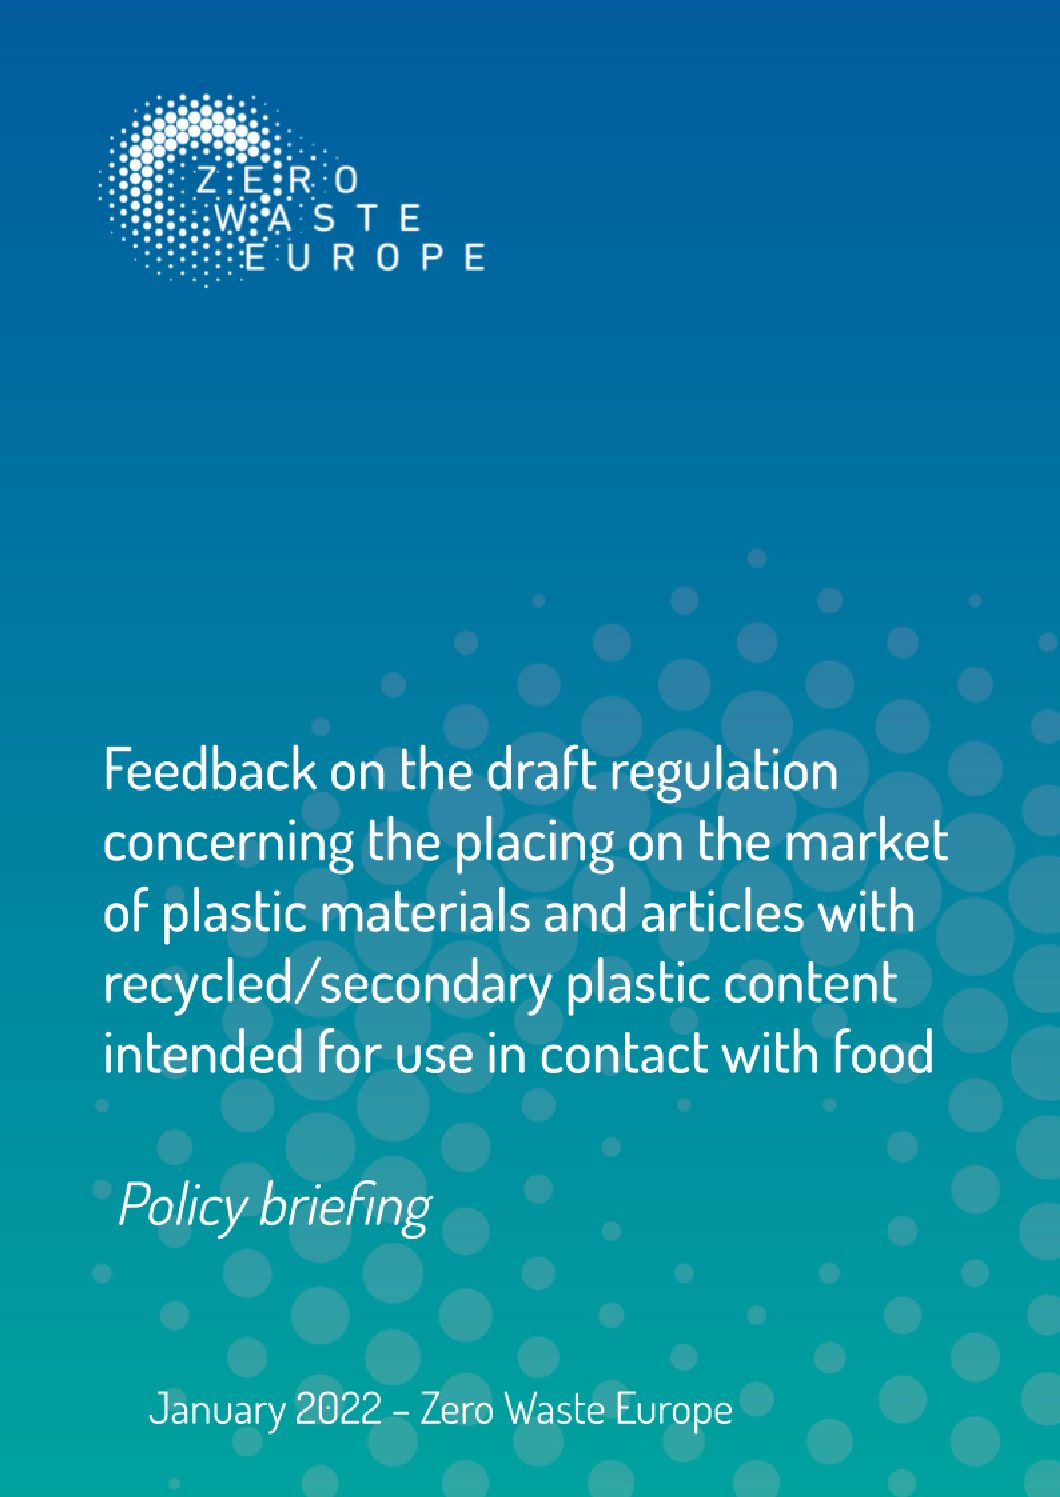 Feedback on the draft regulation concerning the placing on the market of plastic materials and articles with recycled/secondary plastic content intended for use in contact with food